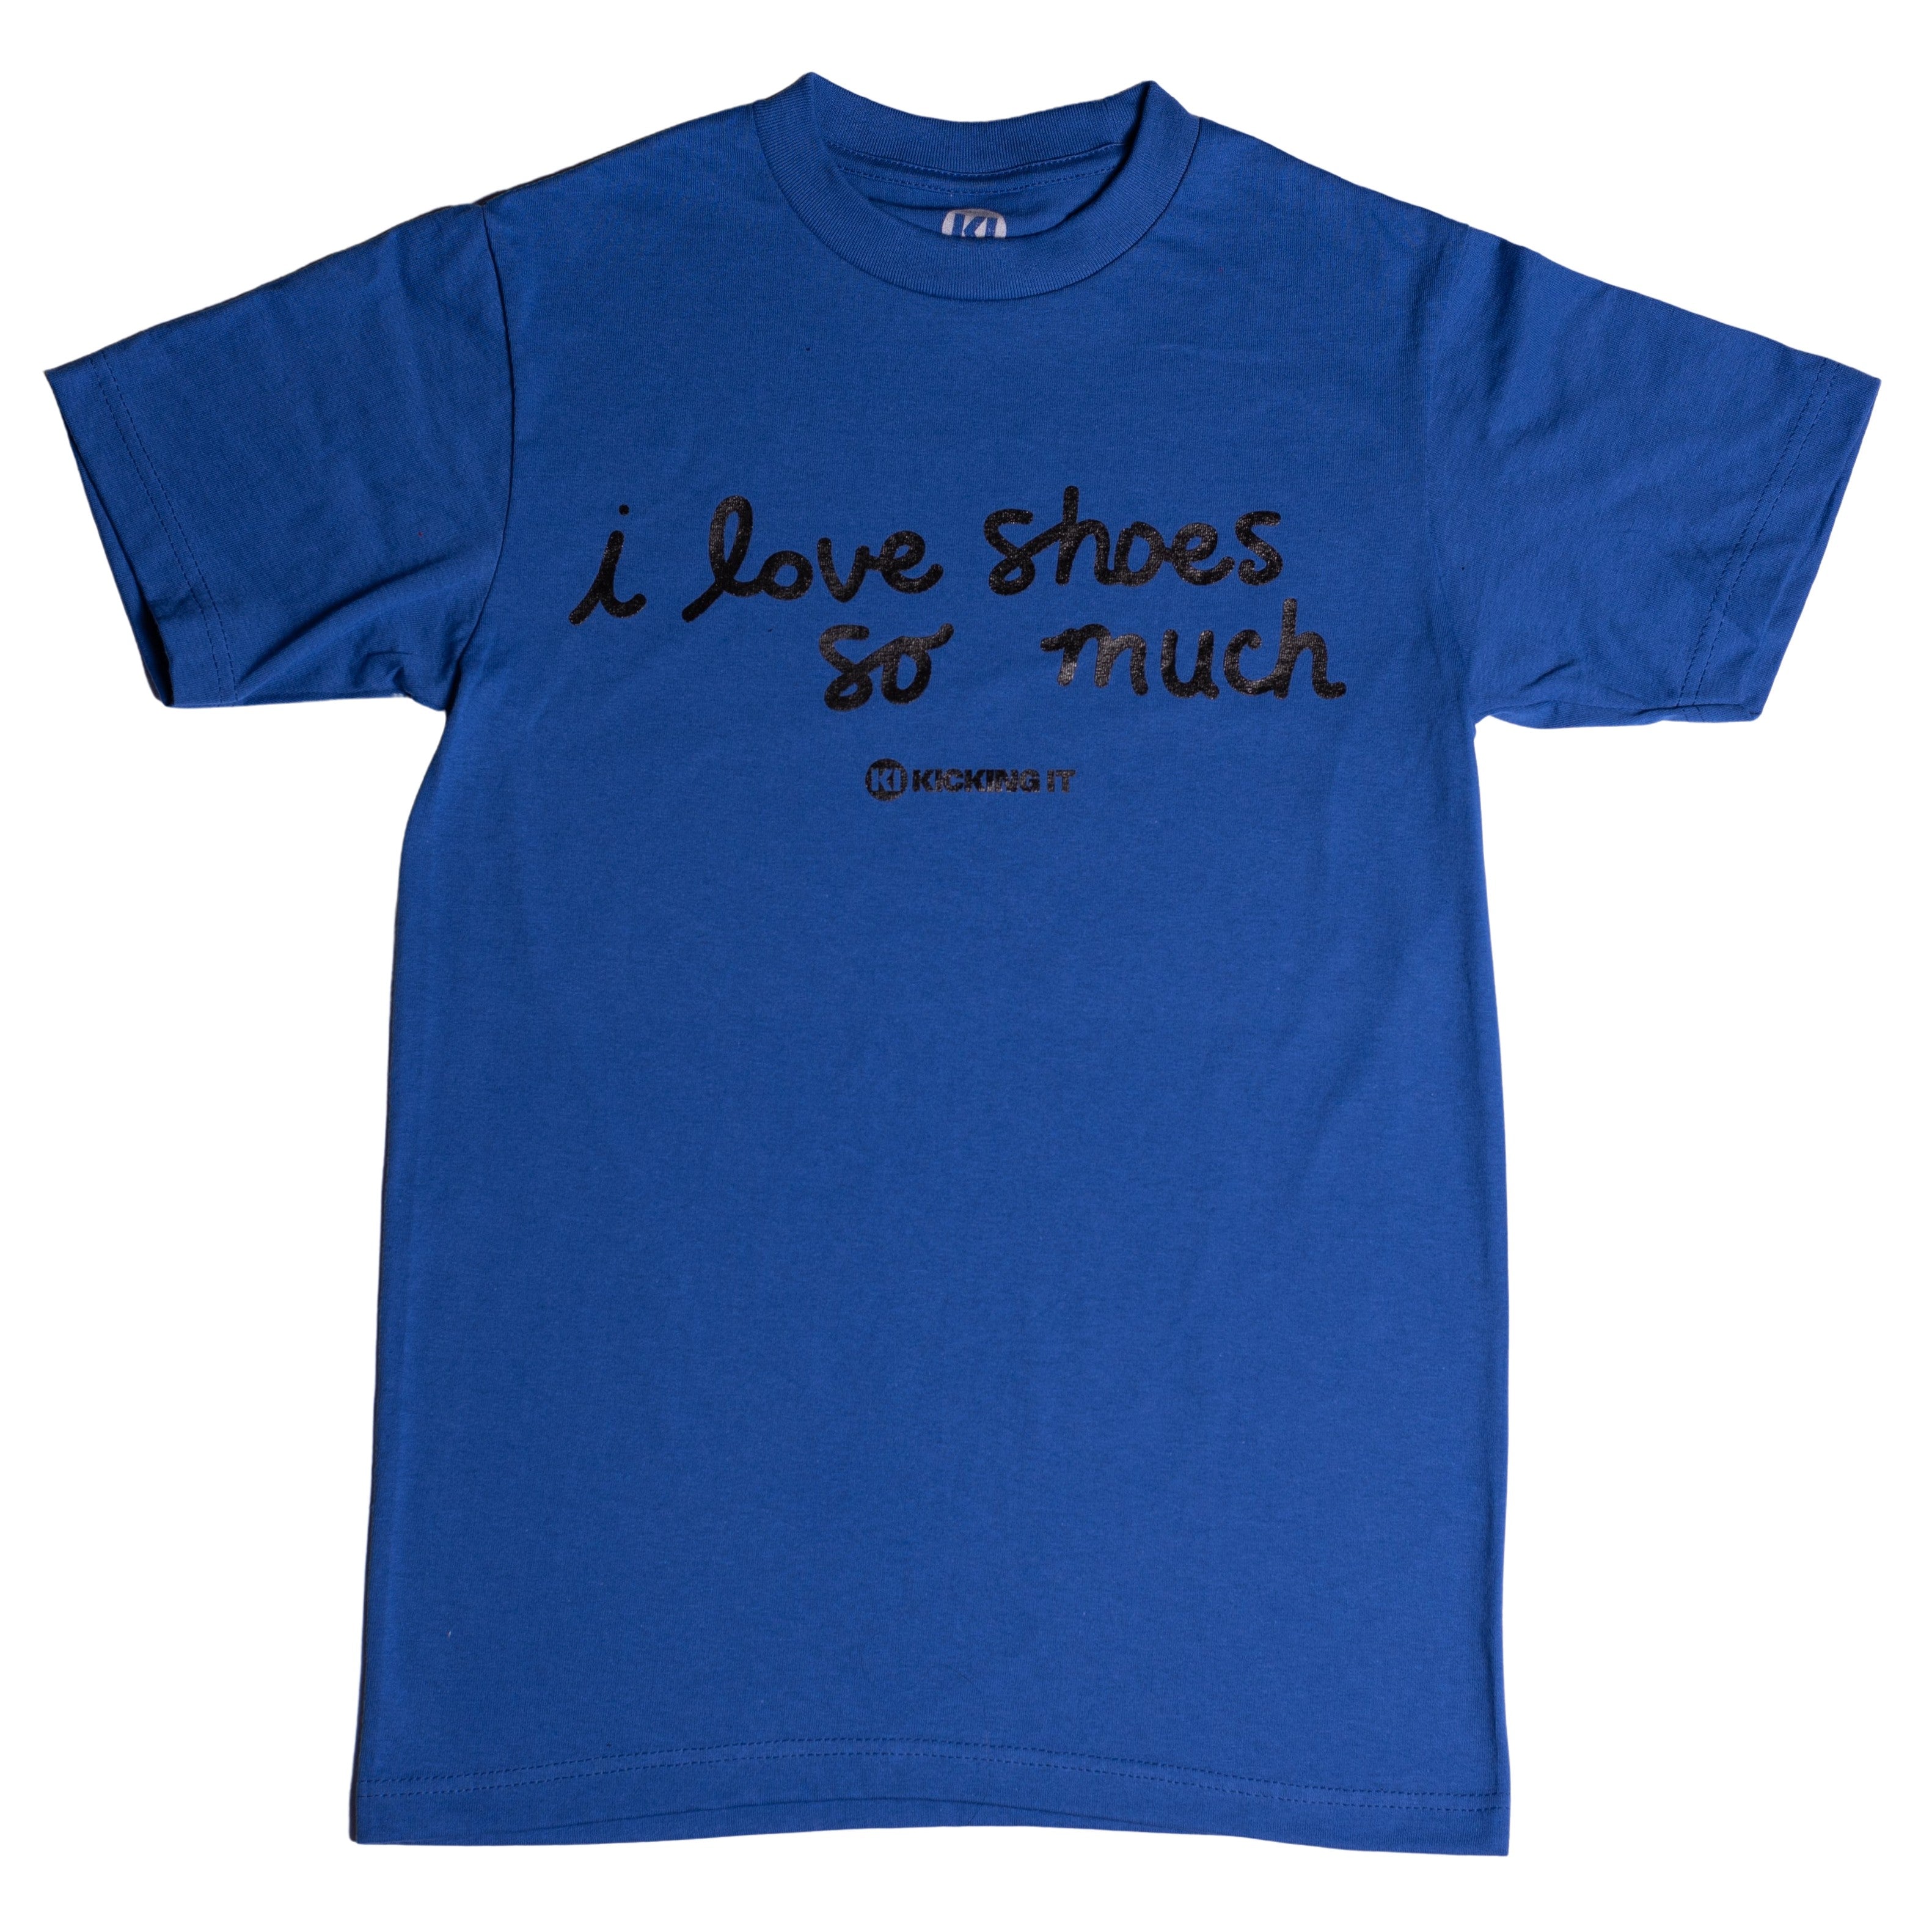 I Love Shoes So Much Tee (Blue/Black)